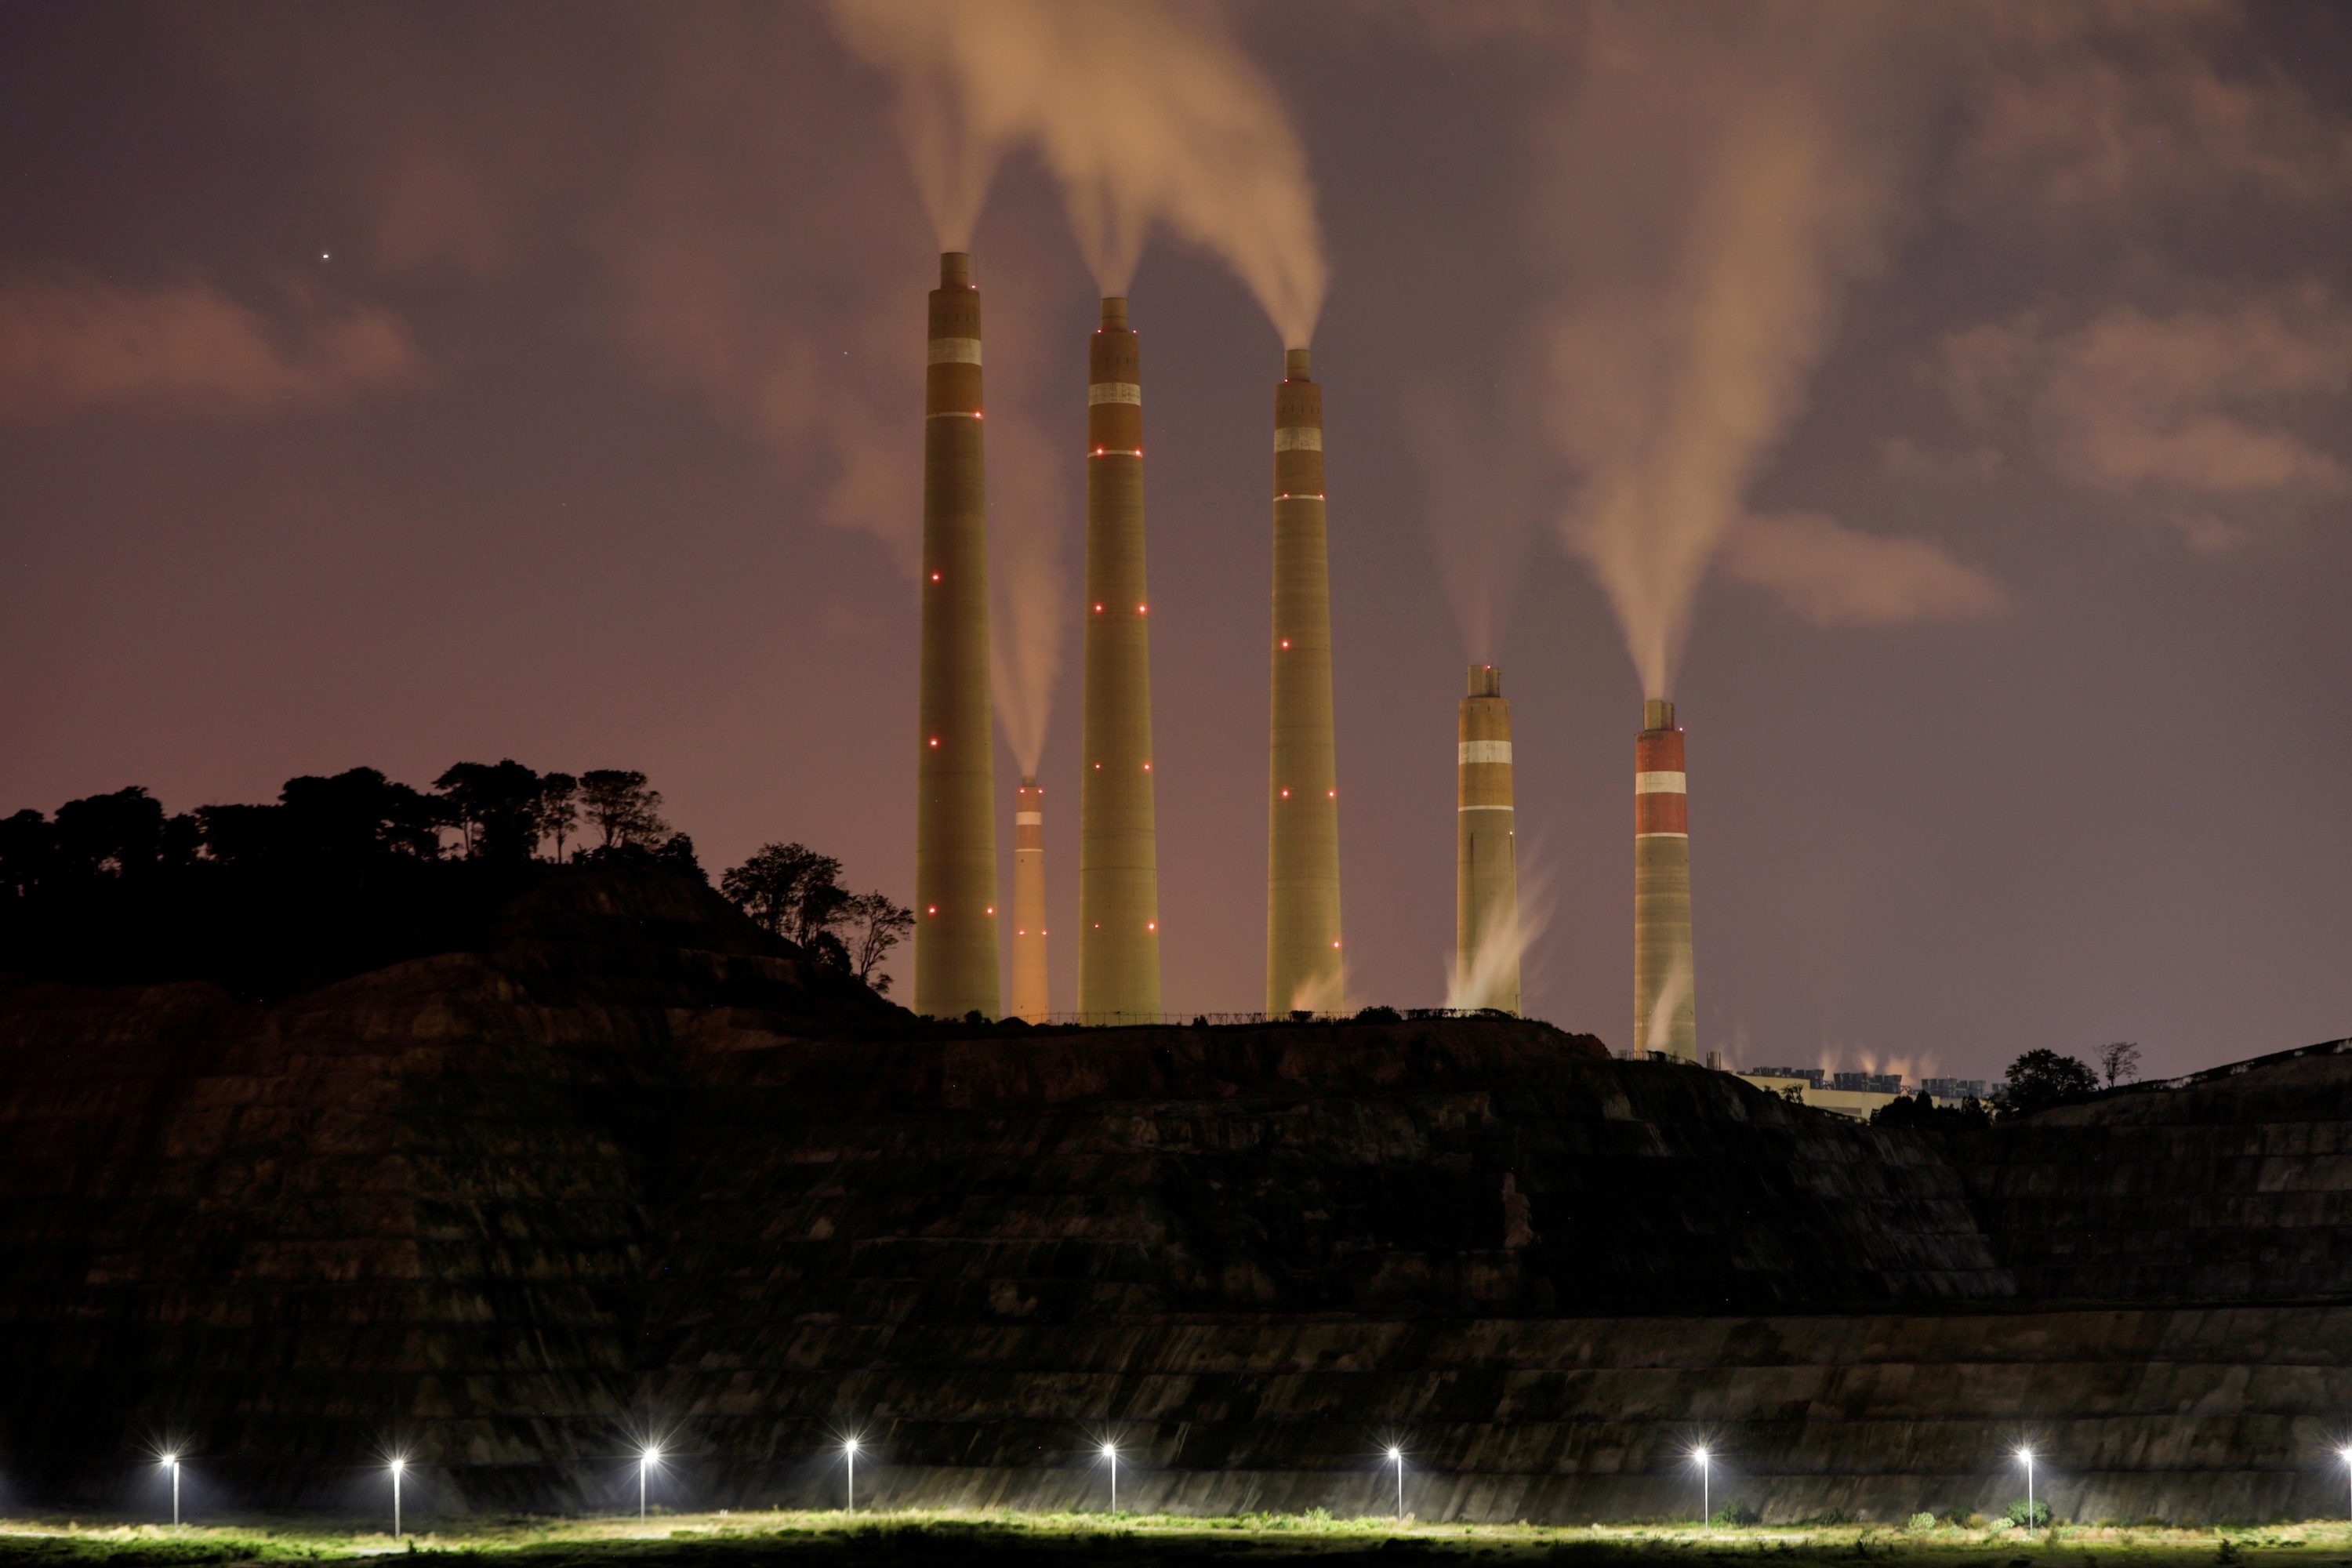 ADB sets plan to retire coal-fired power plants in the Philippines, Indonesia